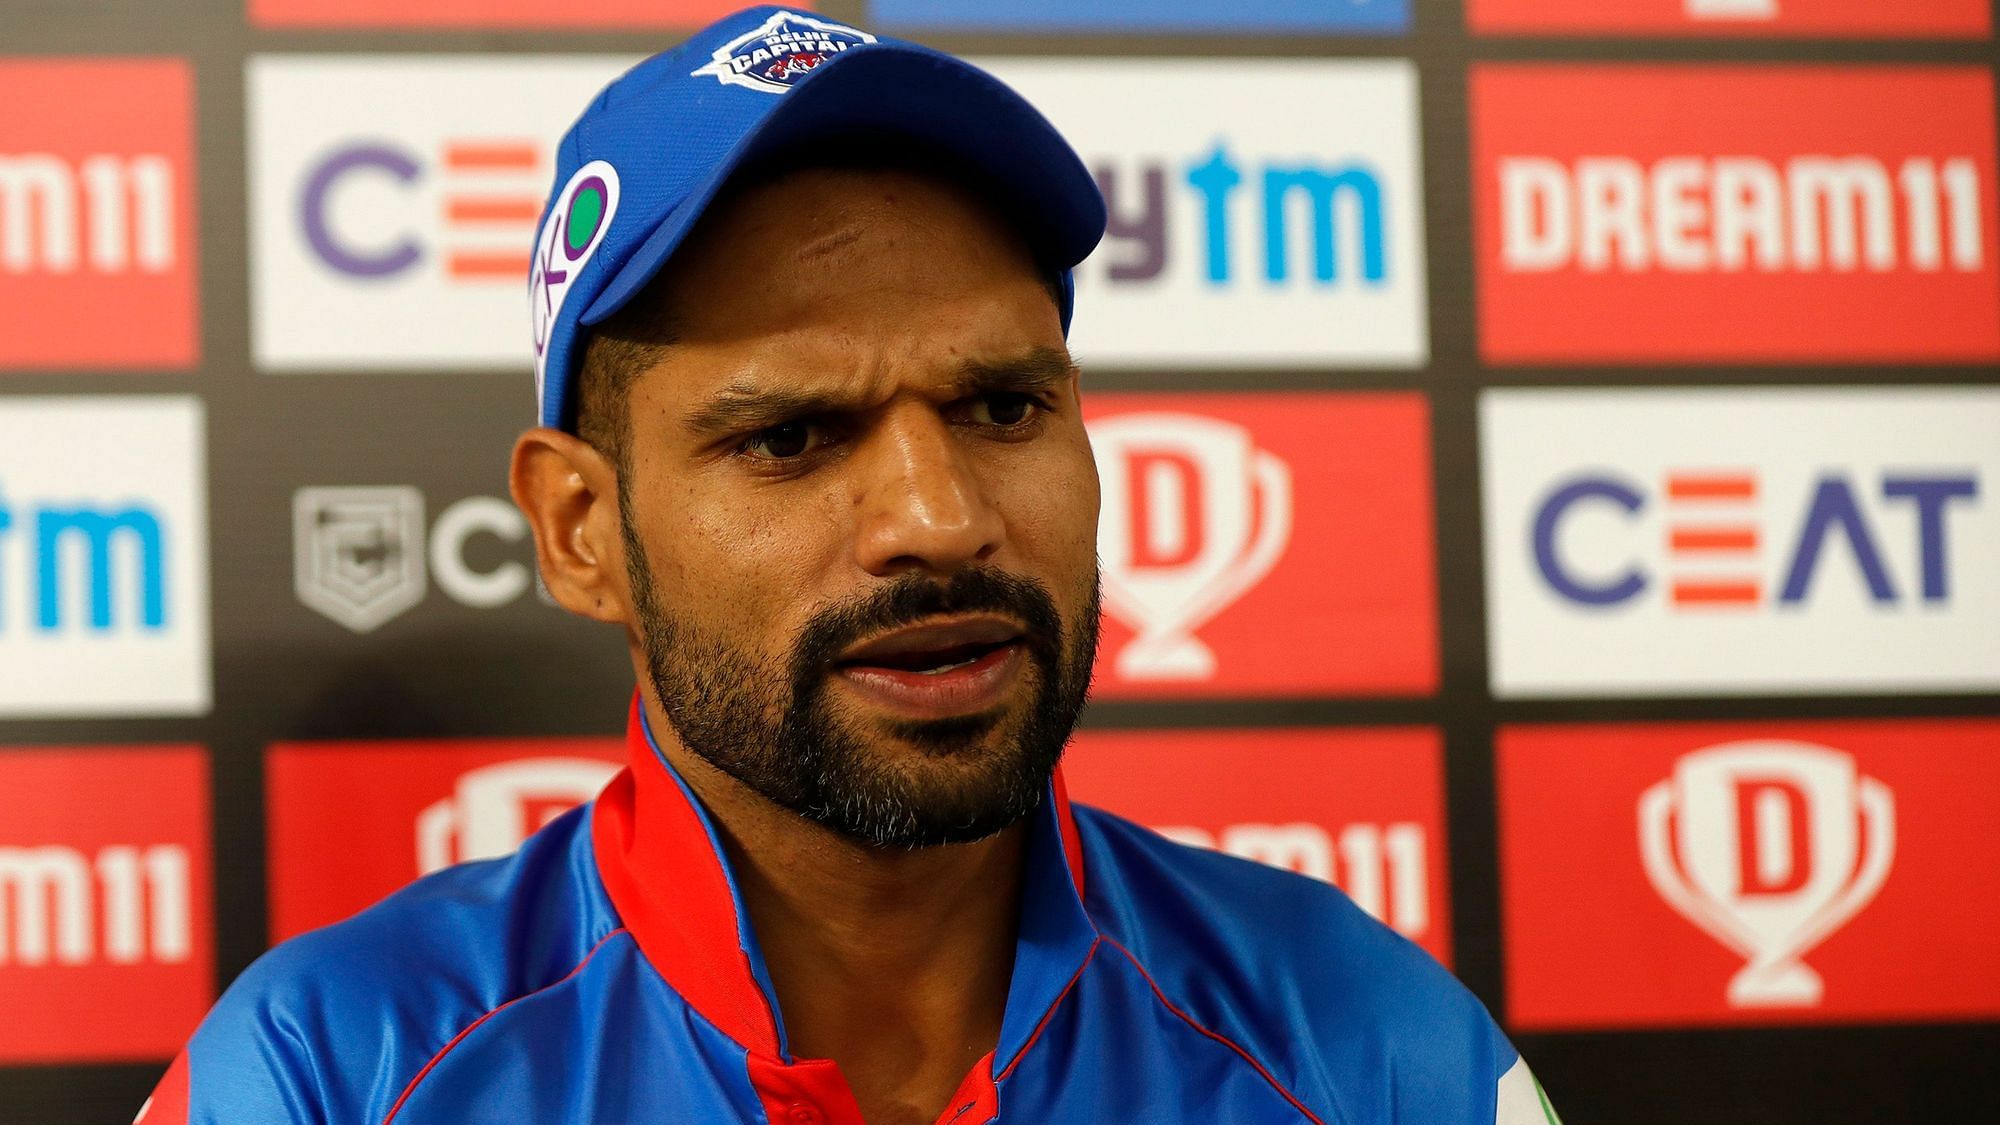 Shikhar Dhawan said that they believed they could win if they got Royals’ top-order out early.